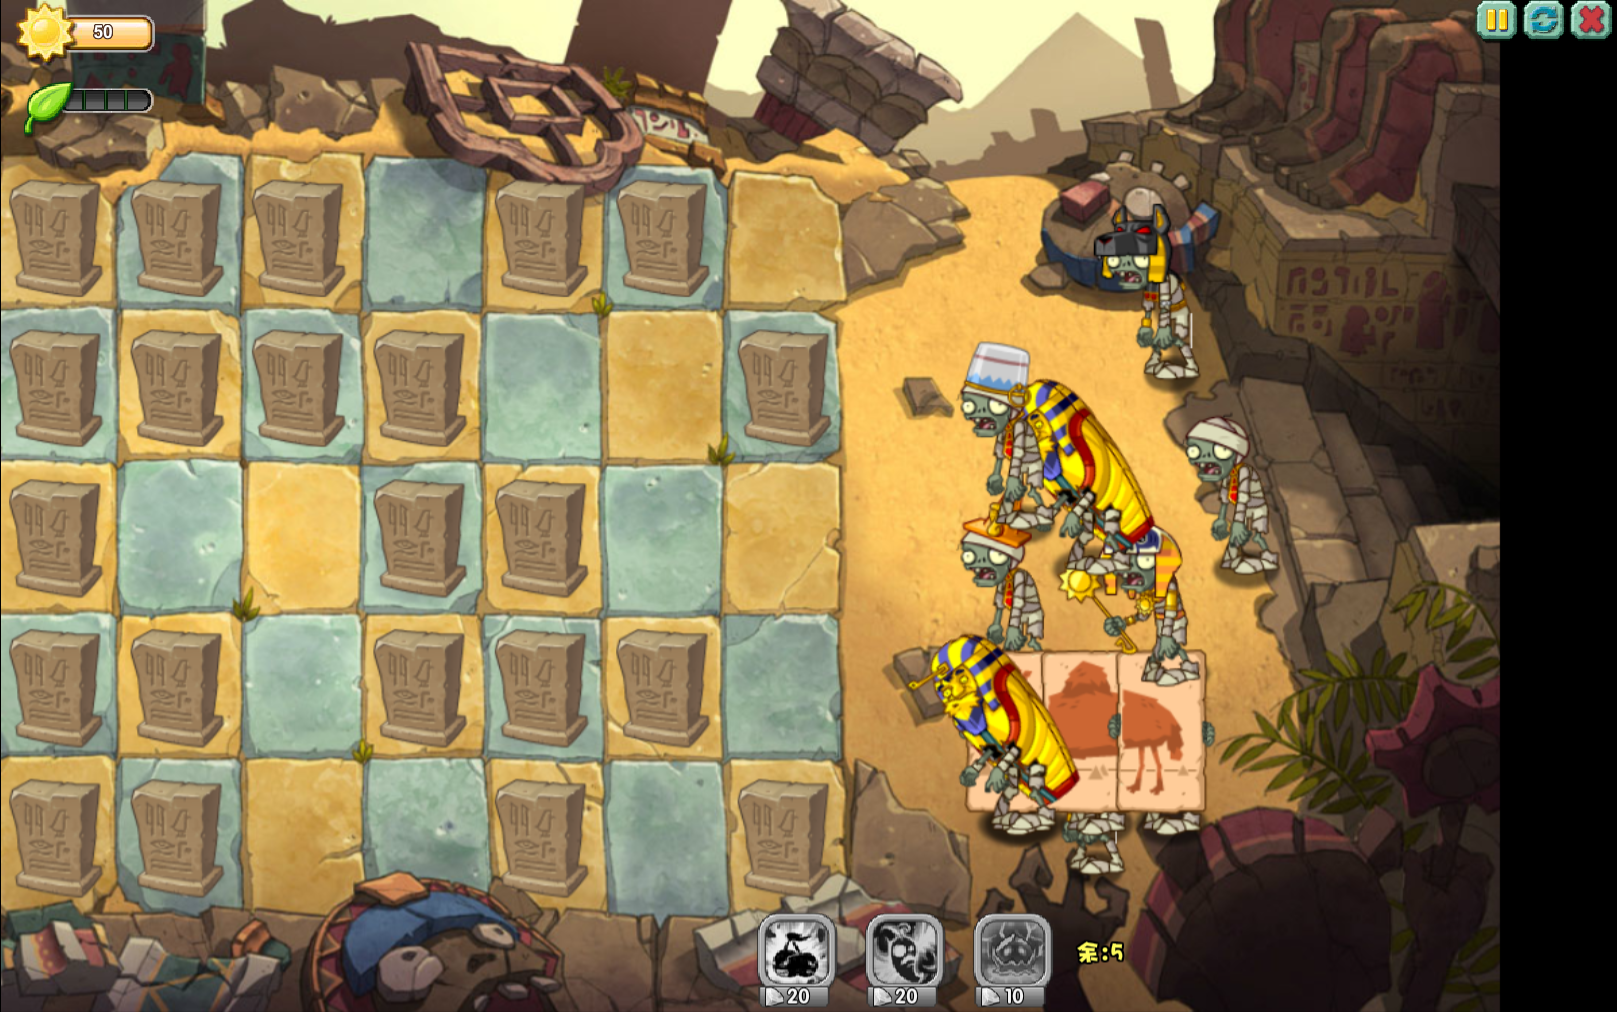 Ancient Egypt - Day 4, Plants vs. Zombies Wiki